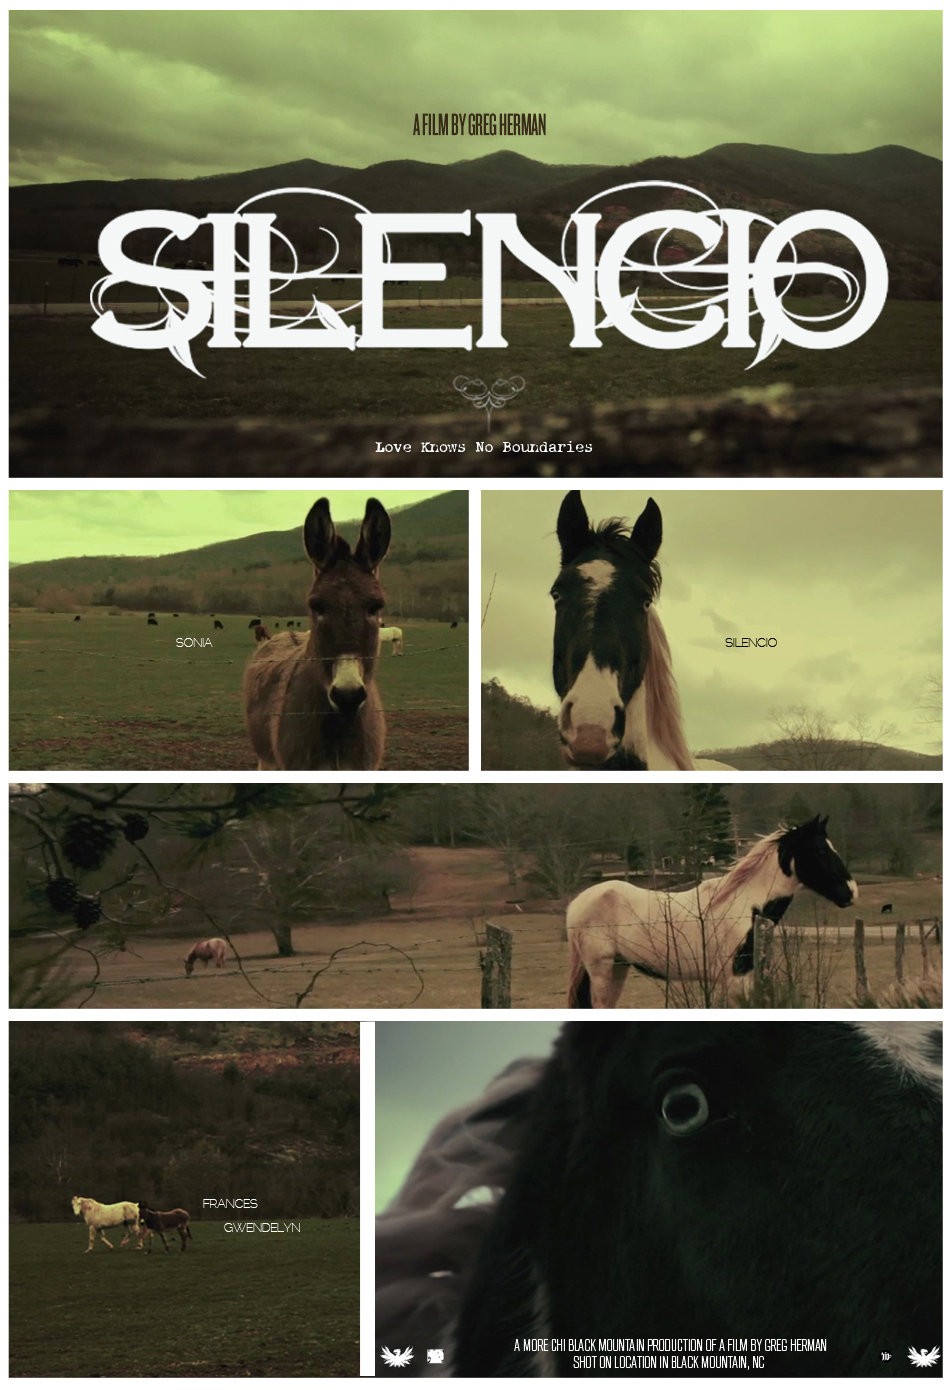 Extra Large Movie Poster Image for Silencio